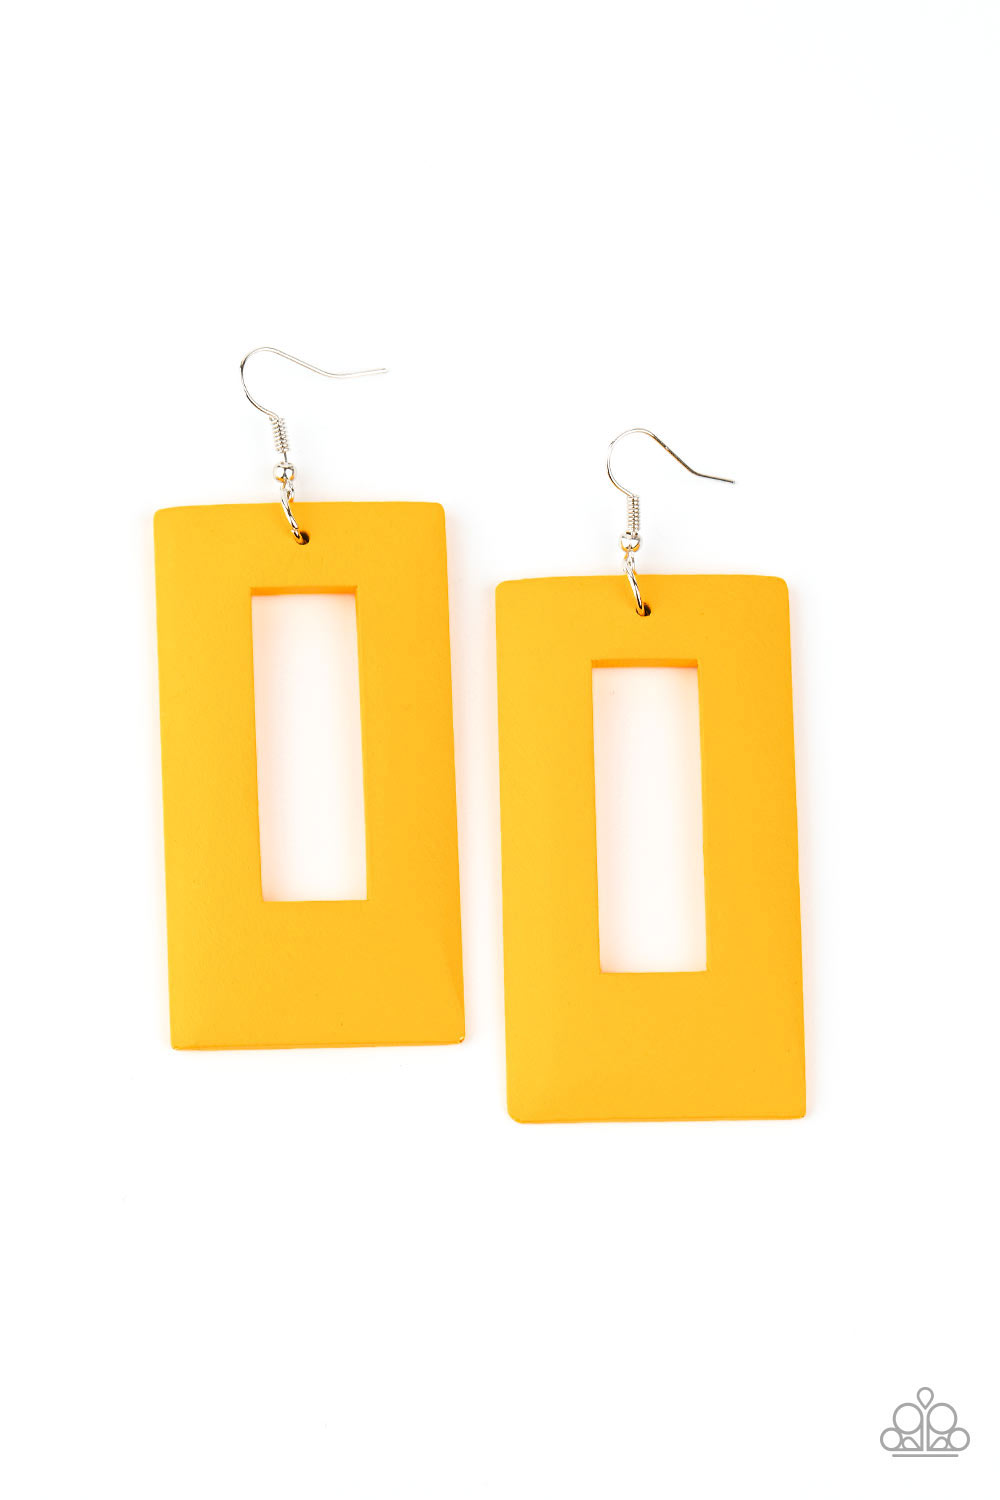 Paparazzi Totally Framed - Yellow Wooden Earrings - A Finishing Touch Jewelry